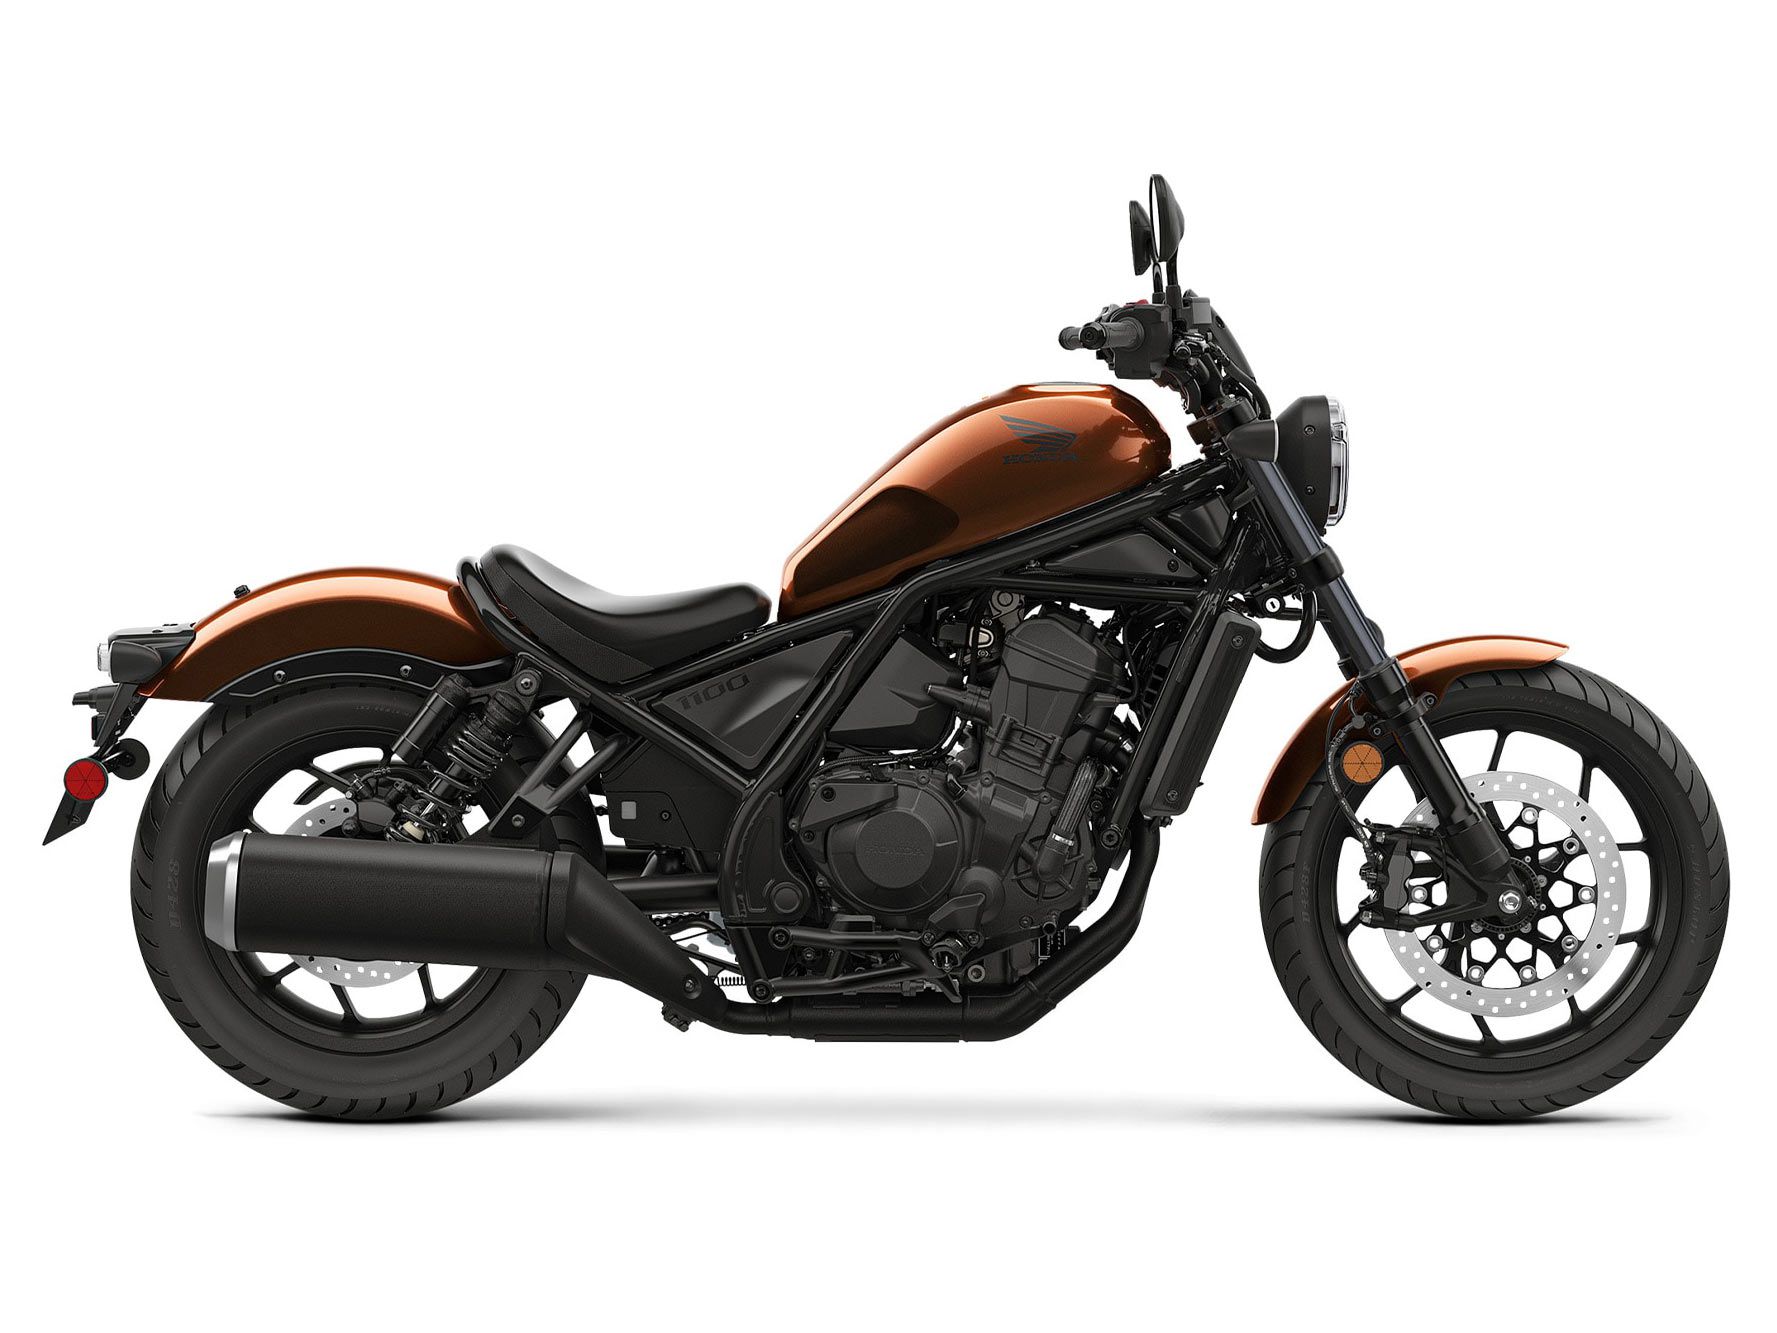 The Honda Rebel 1100 might just be the thinking man’s or woman’s cruiser.